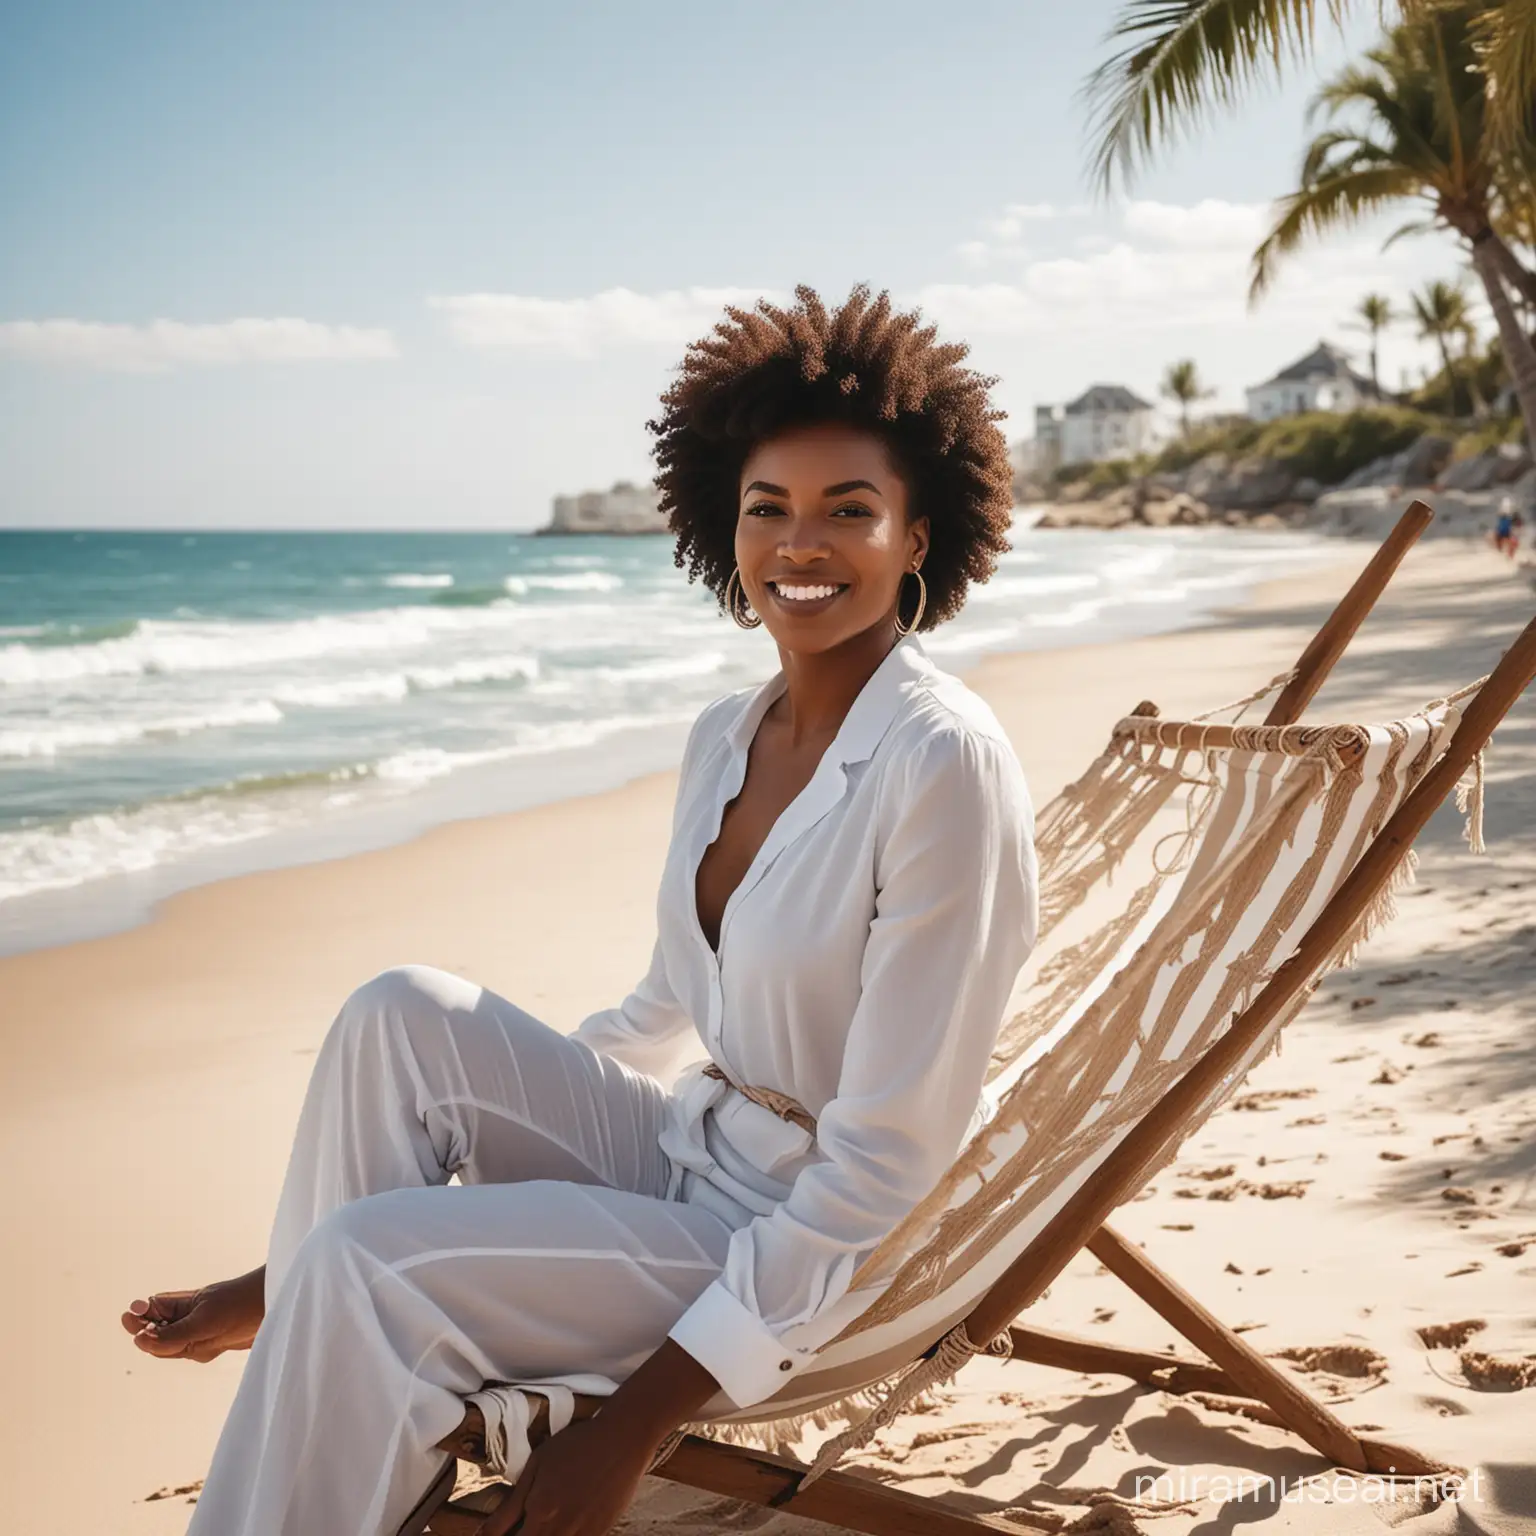 Your body, mind, and spirit are your most loyal corporate allies; treat them well.  Show an image of a black corporate lady relaxing by the beach.